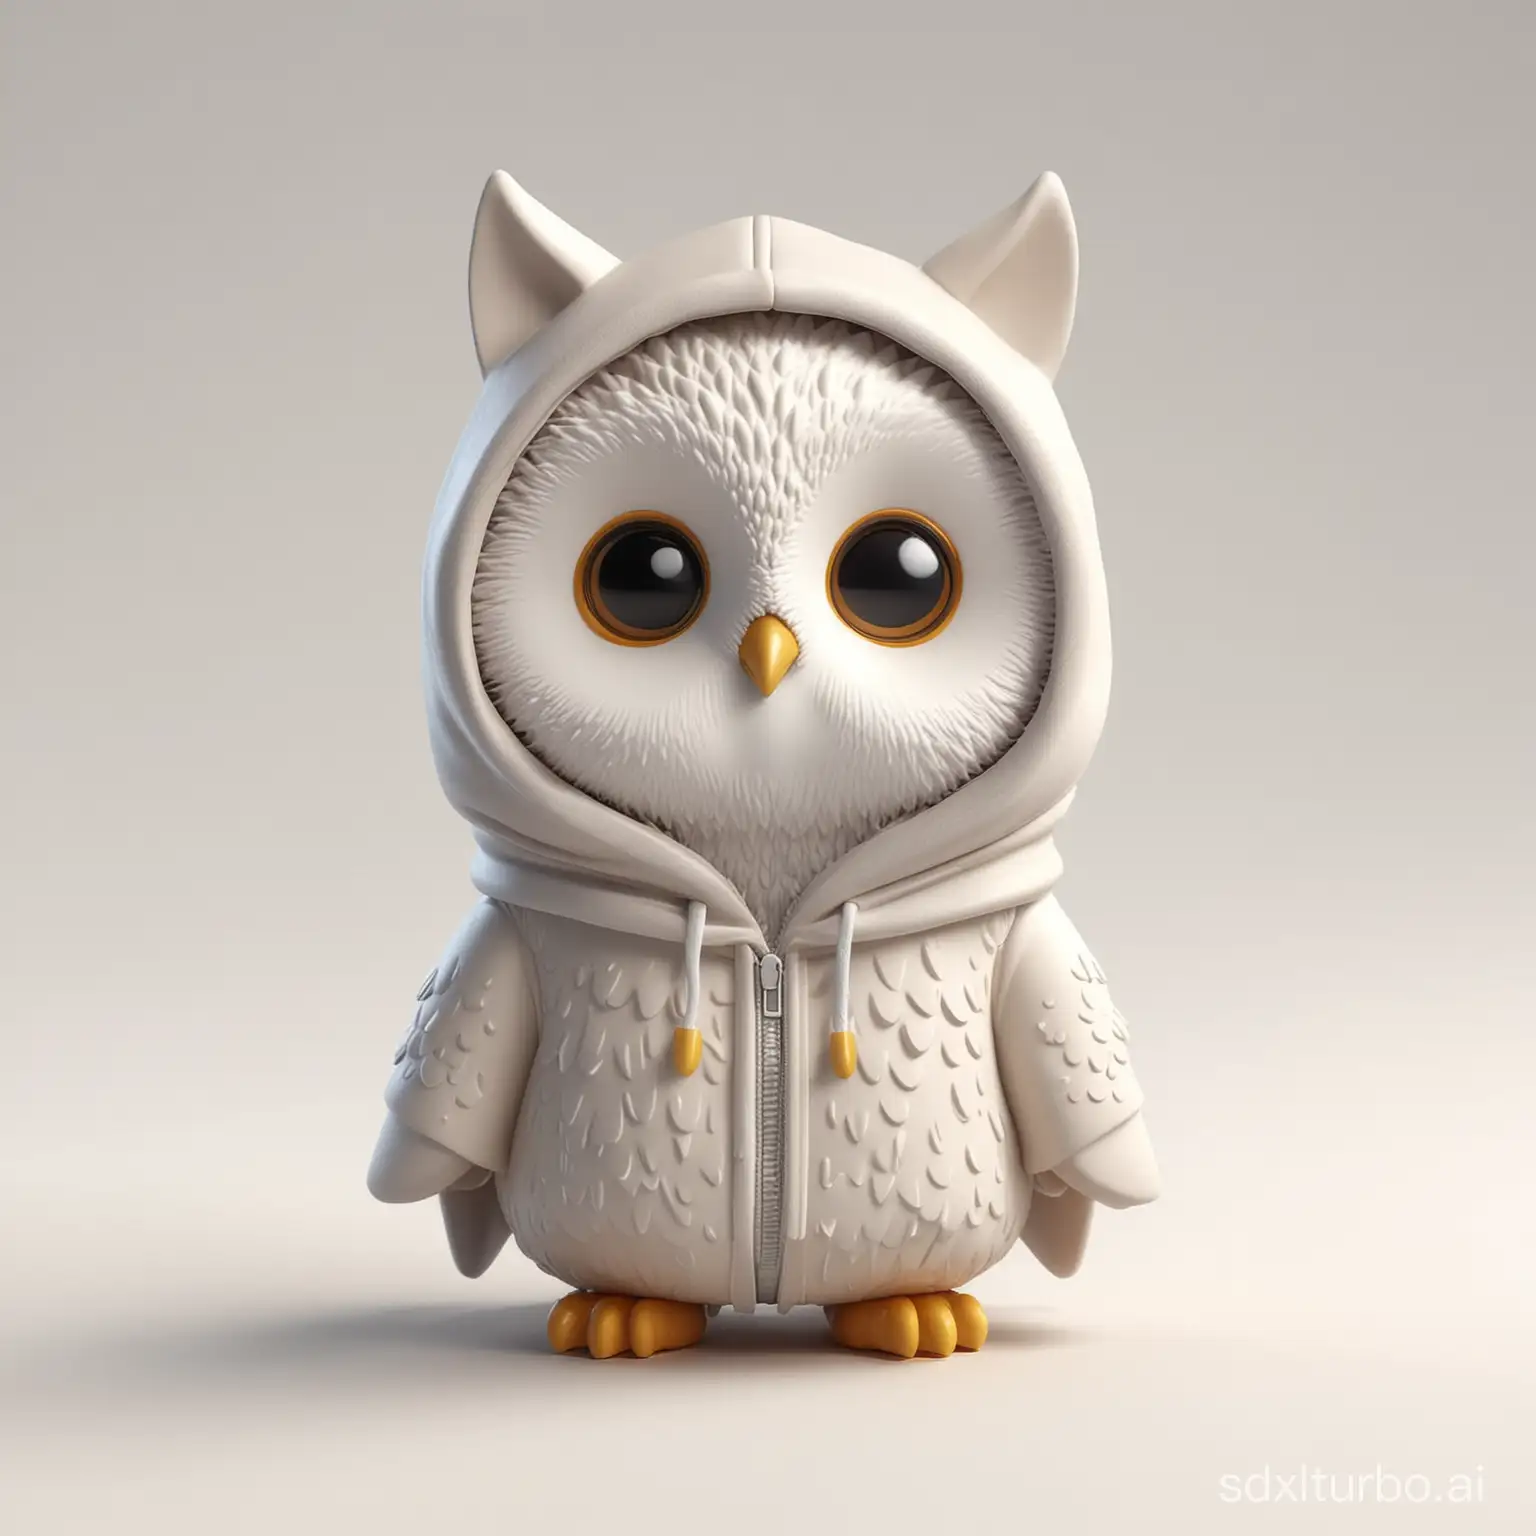 Chibi Vinyl toy 3D character of an owl, isometric render minimalist style, wearing a hoodie, on a solid white background.